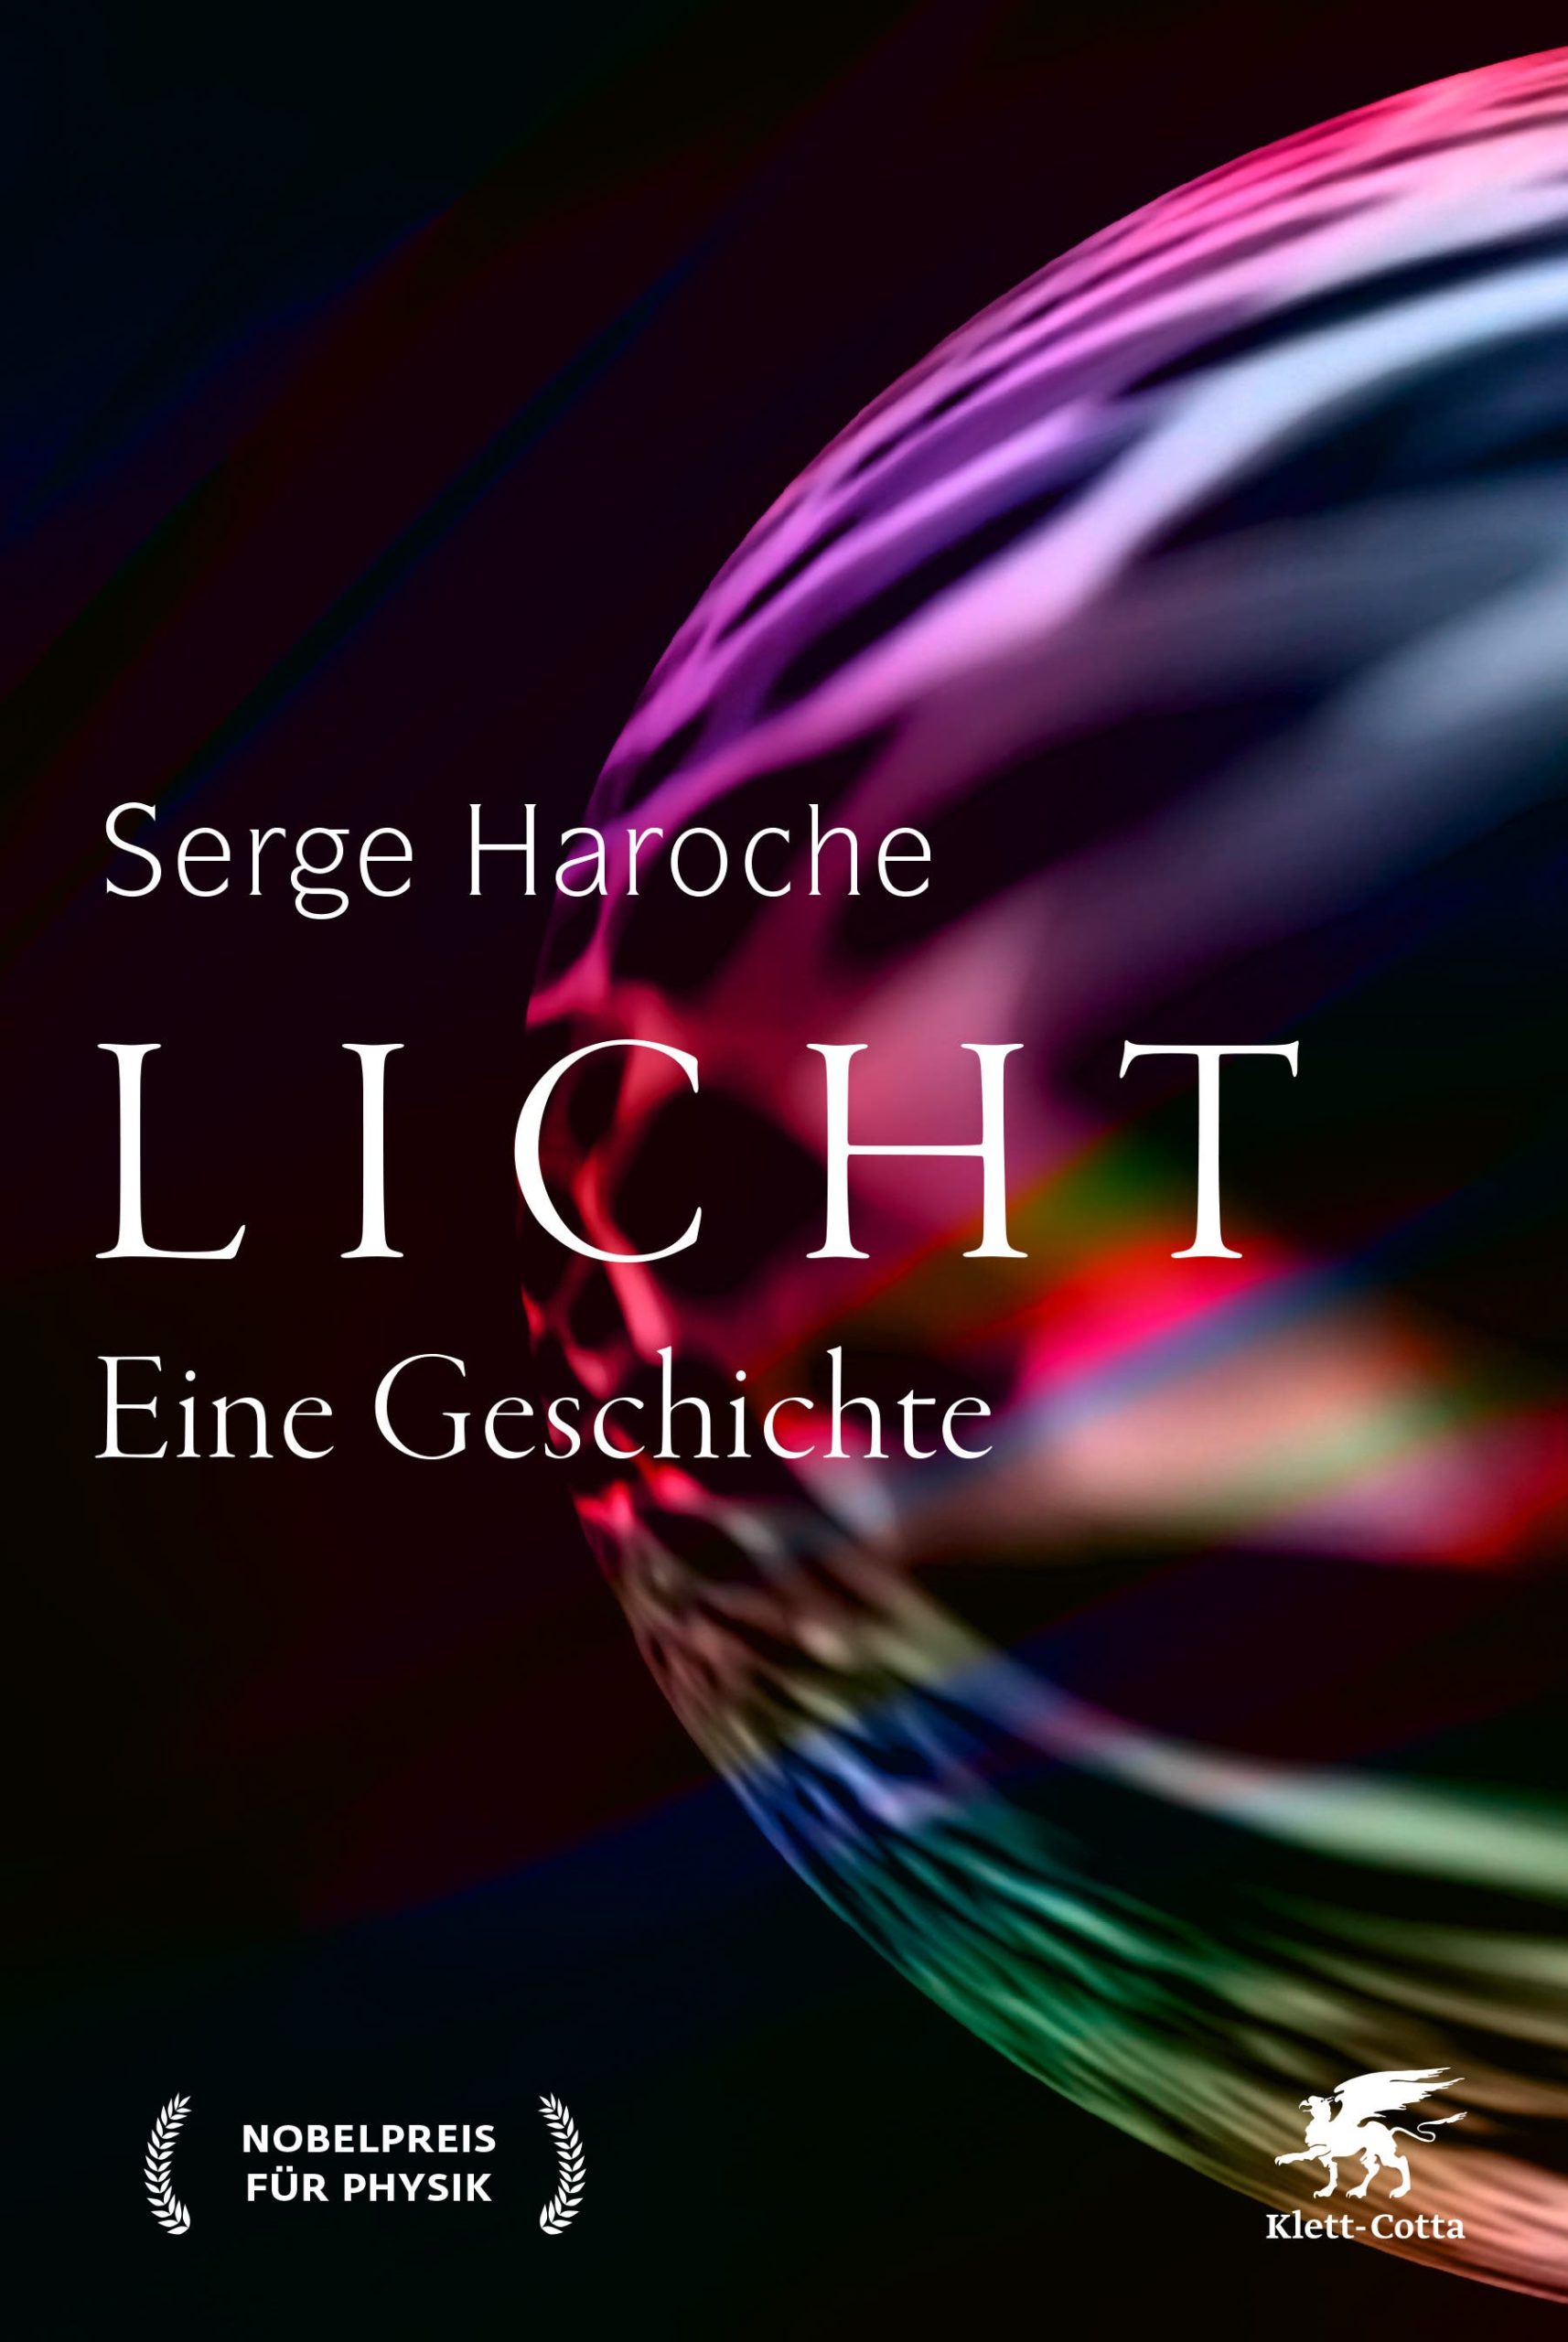 Review of the book "The Light" - Spectrum of Science